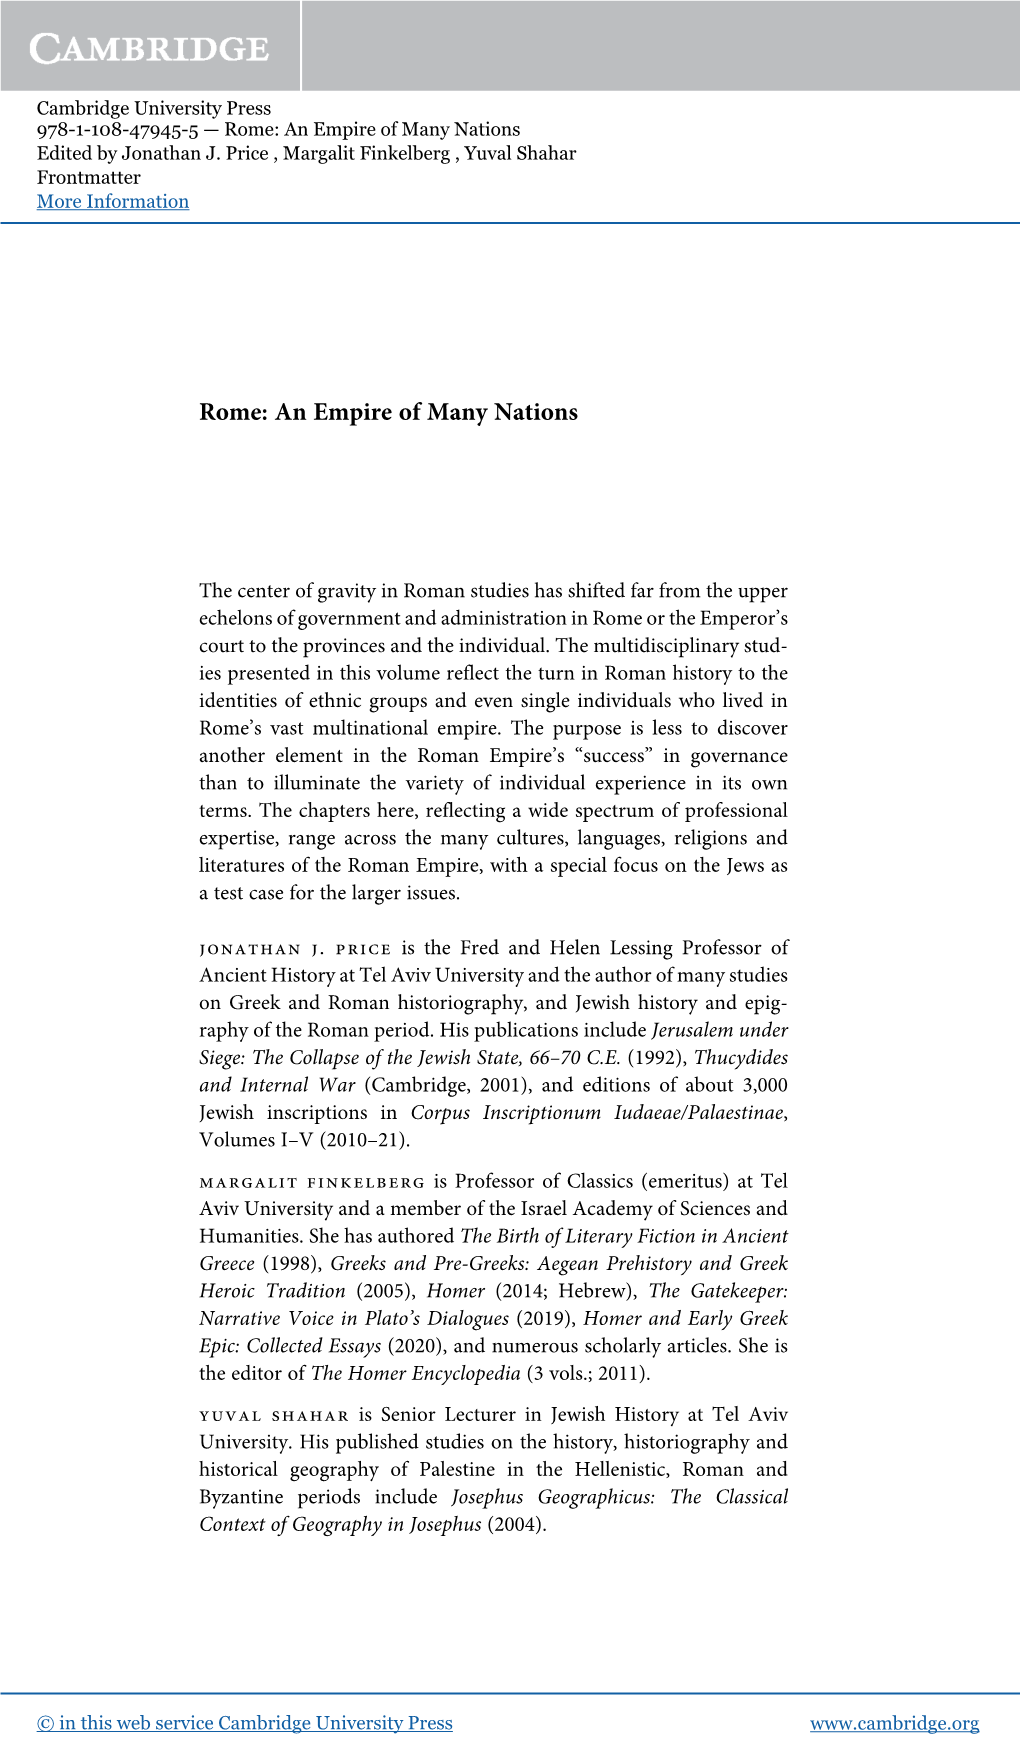 Rome: an Empire of Many Nations Edited by Jonathan J